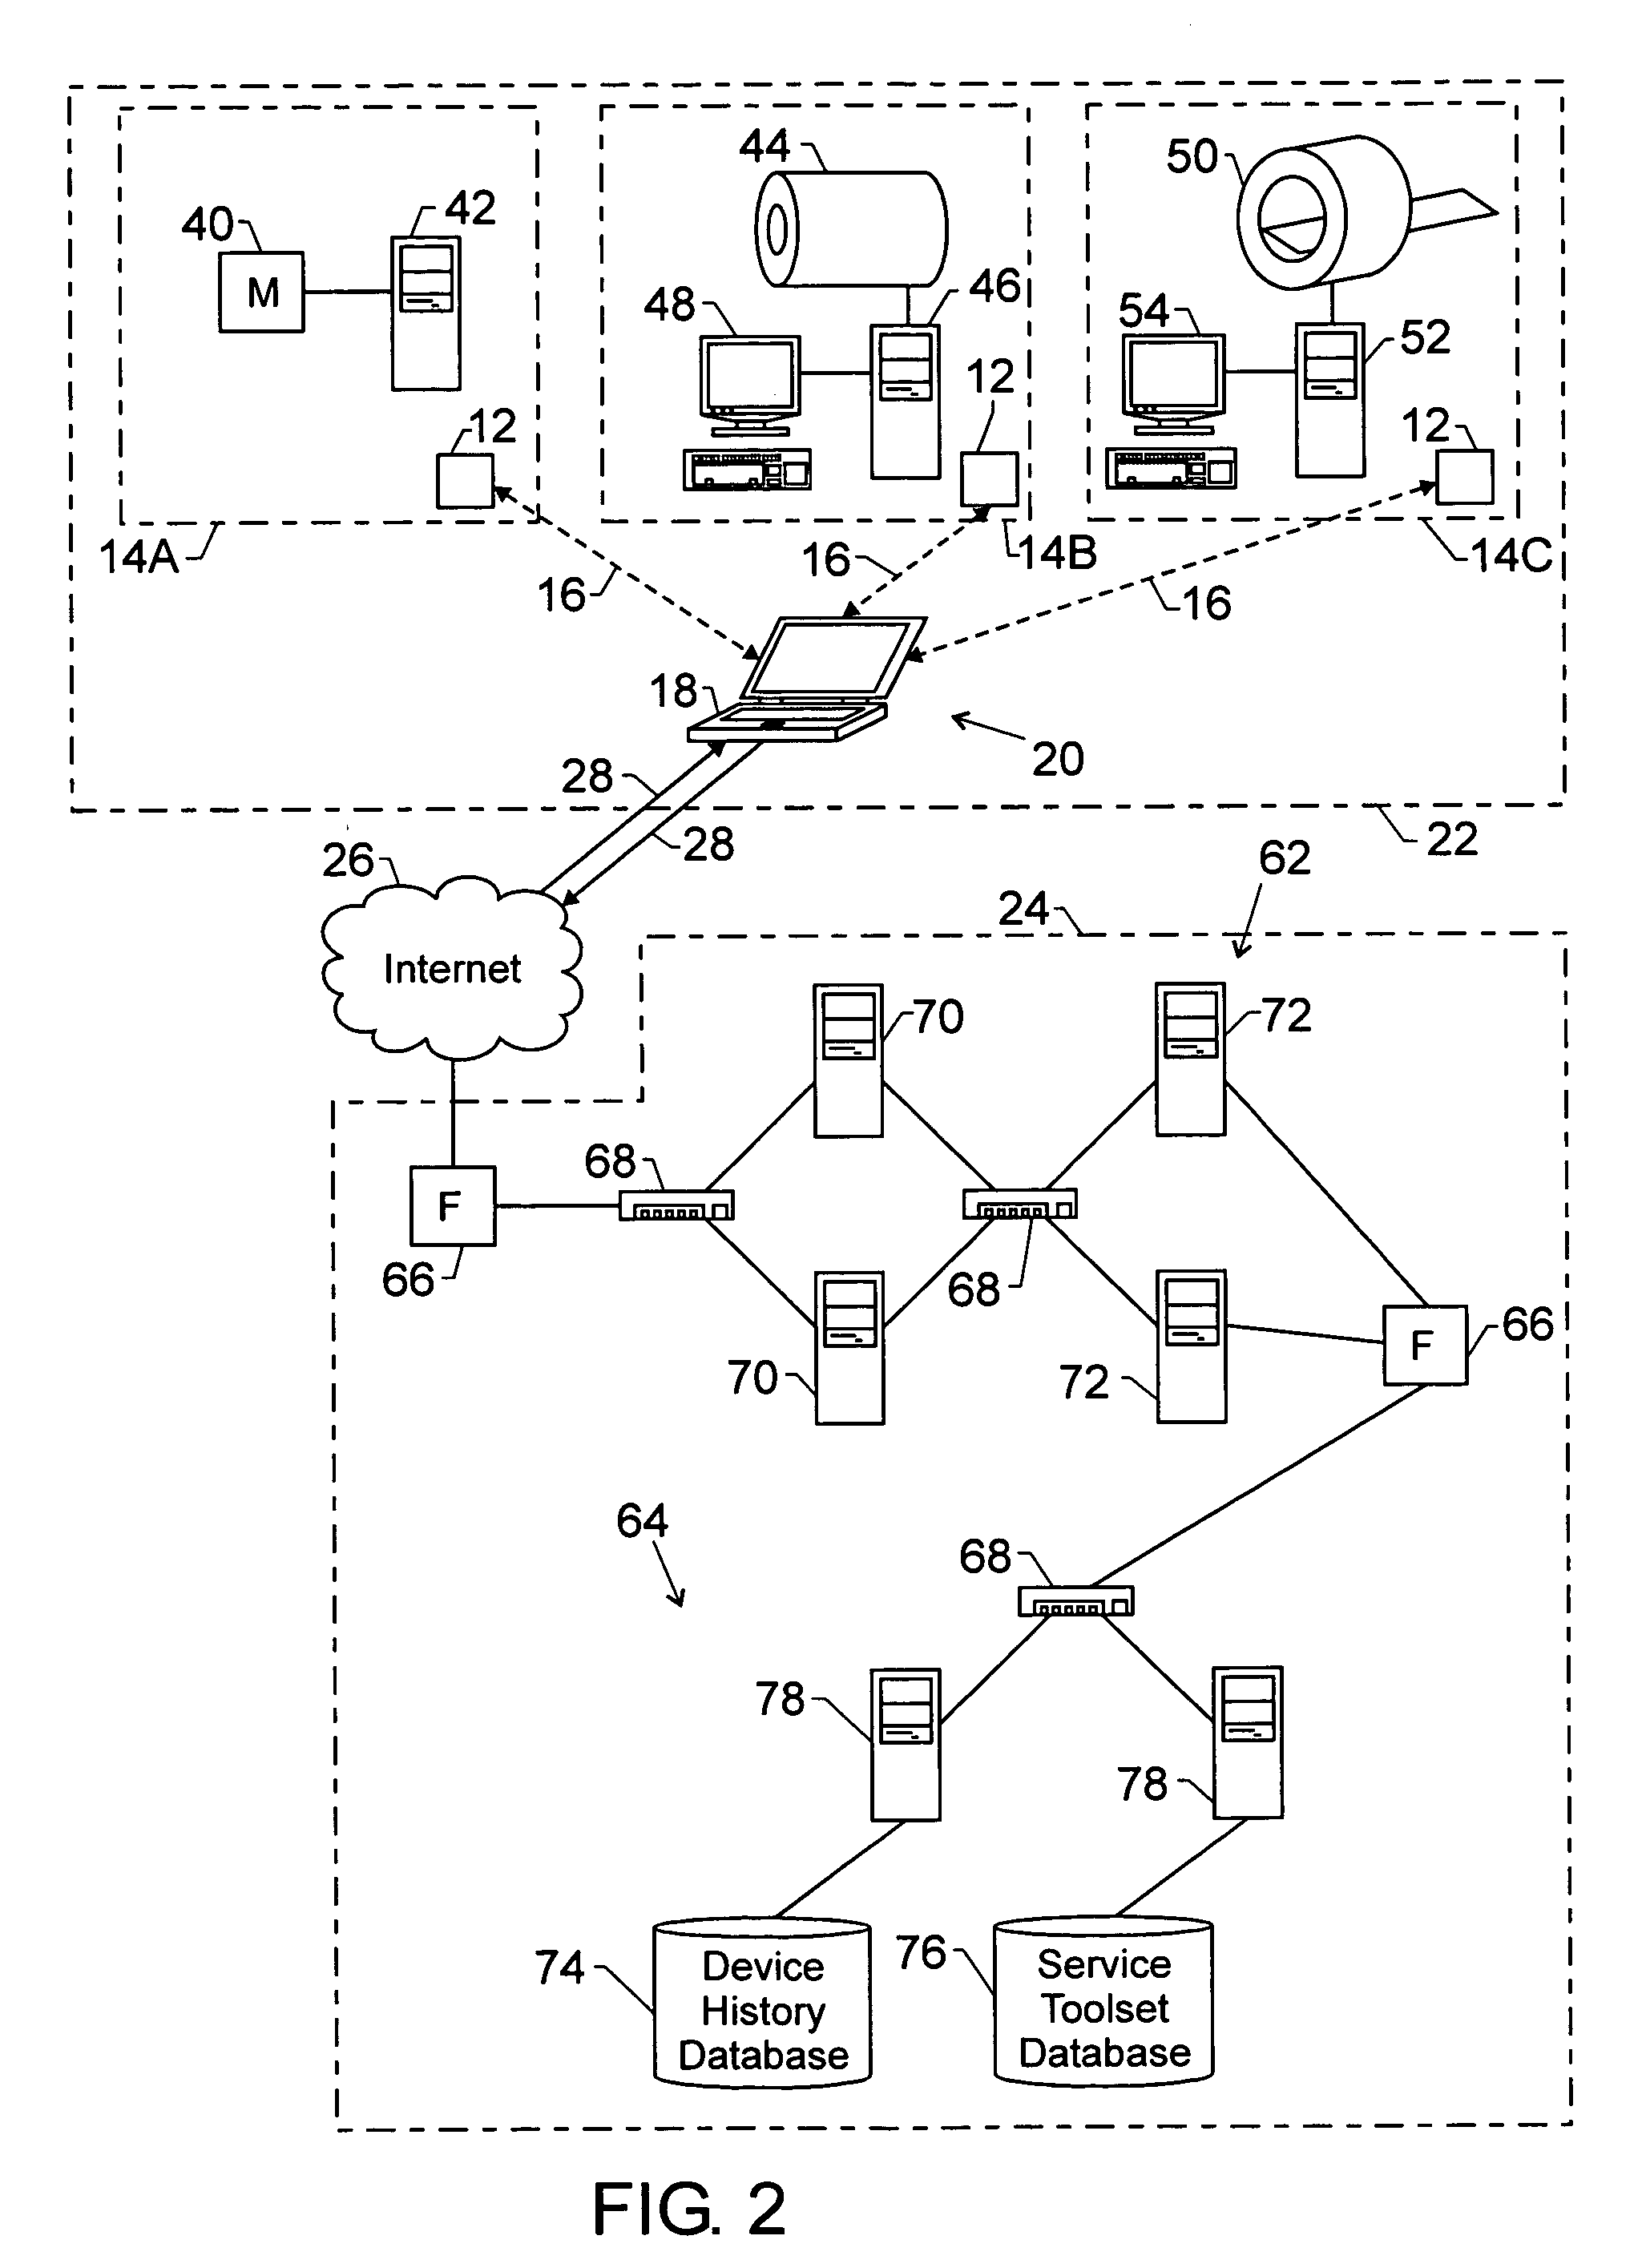 System and method for location based remote services